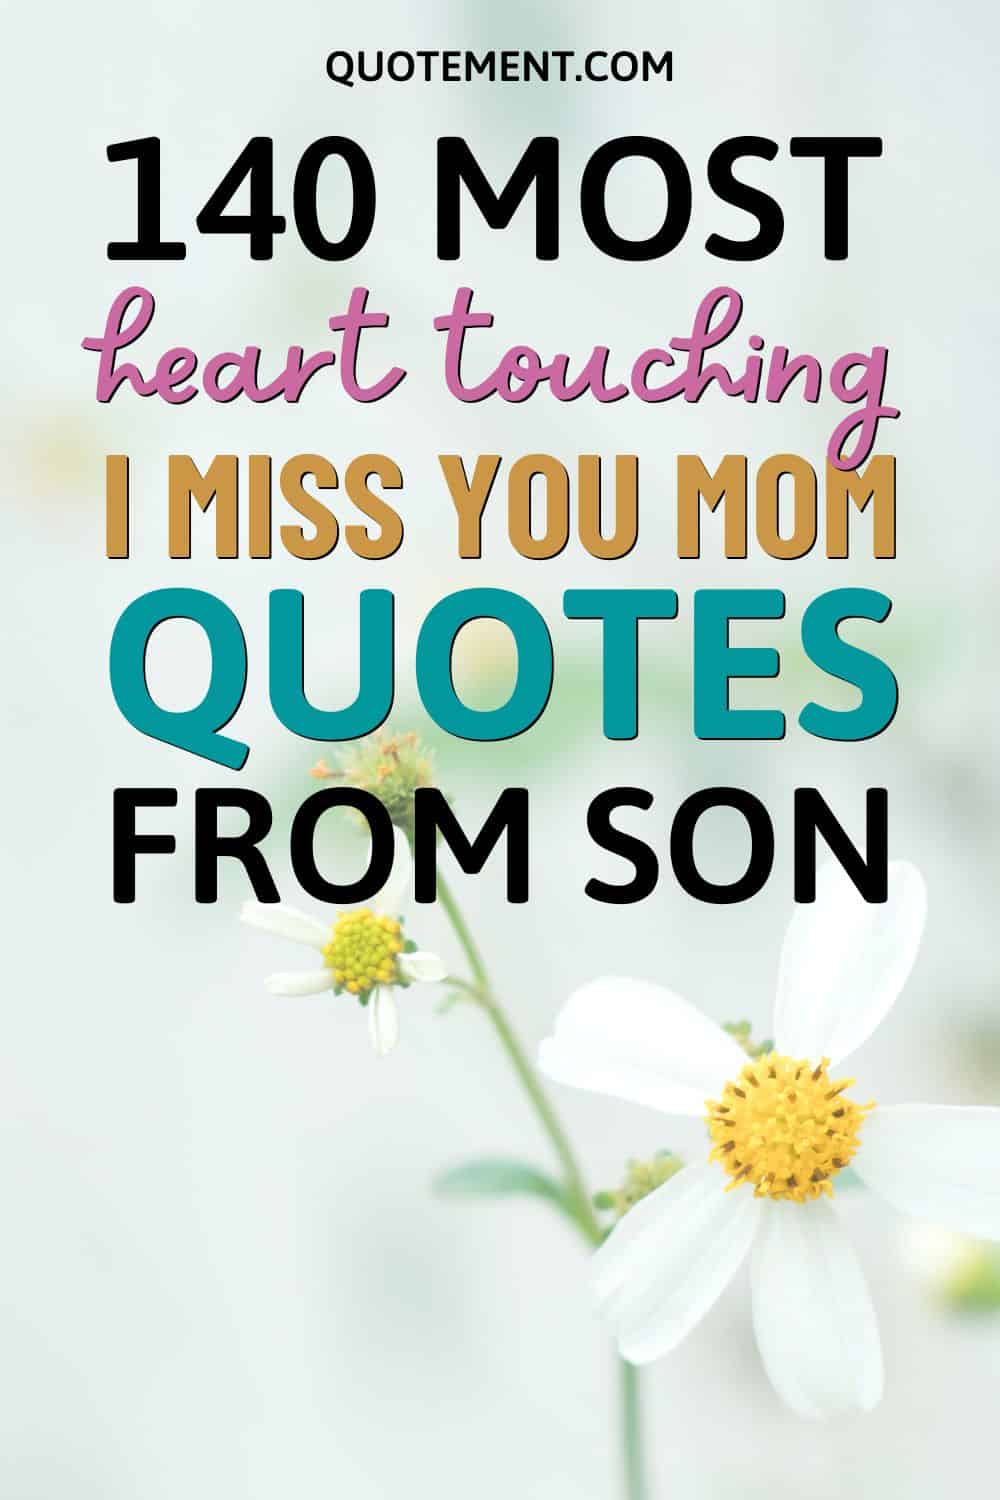 140 Most Heart Touching I Miss You Mom Quotes From Son